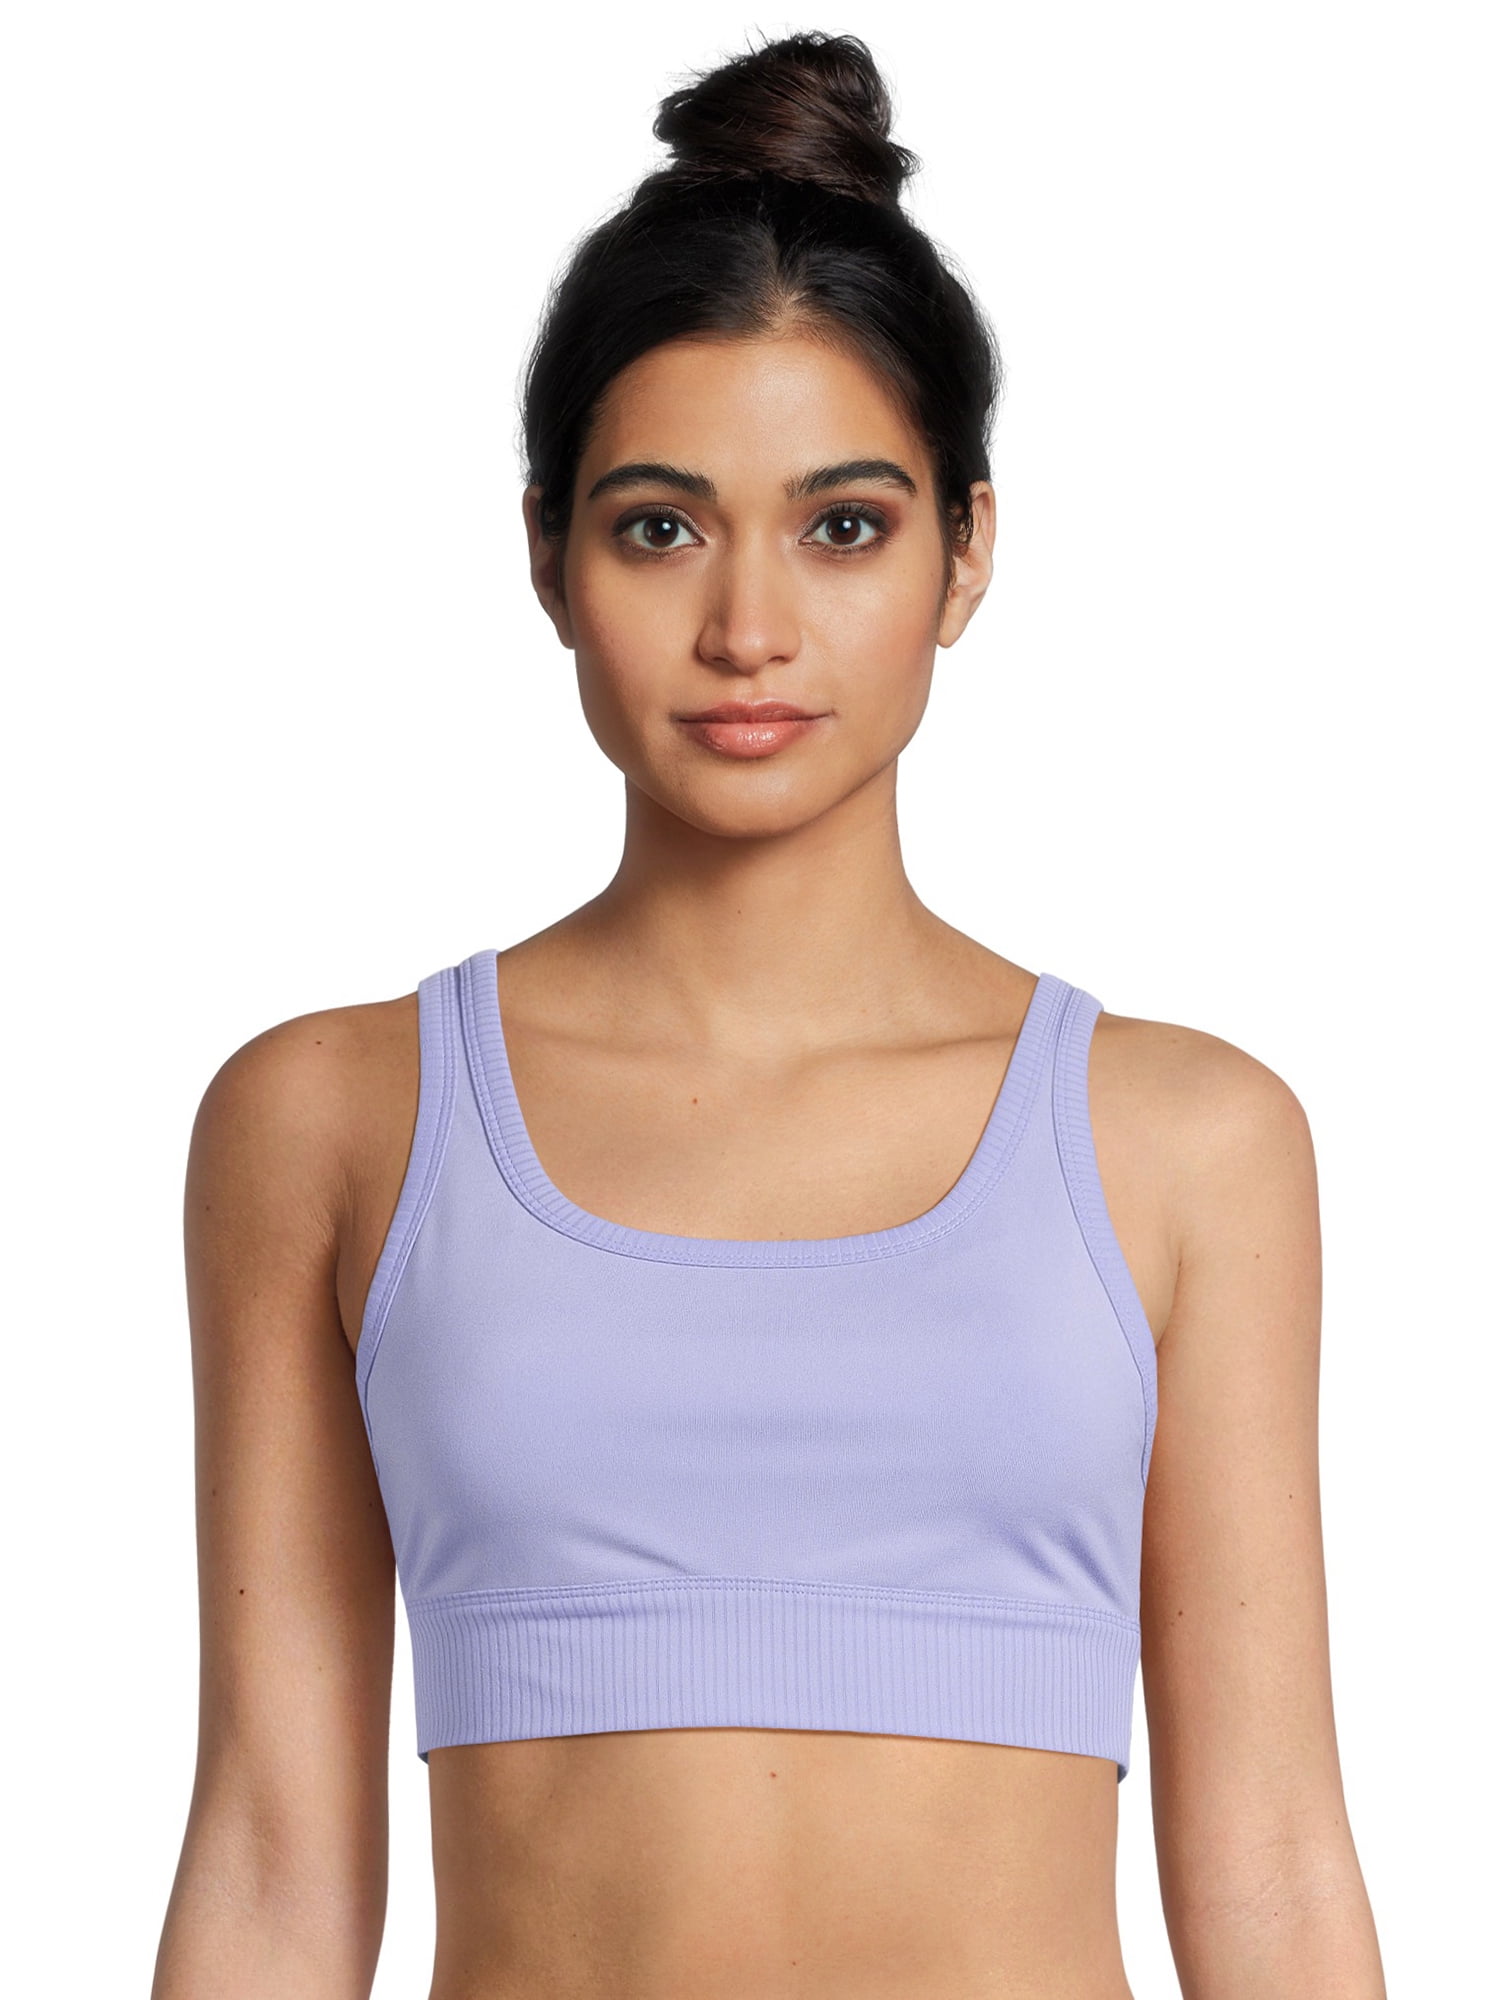 Avia Women's High Impact Strappy Molded Cup Sports Bra, Sizes XS